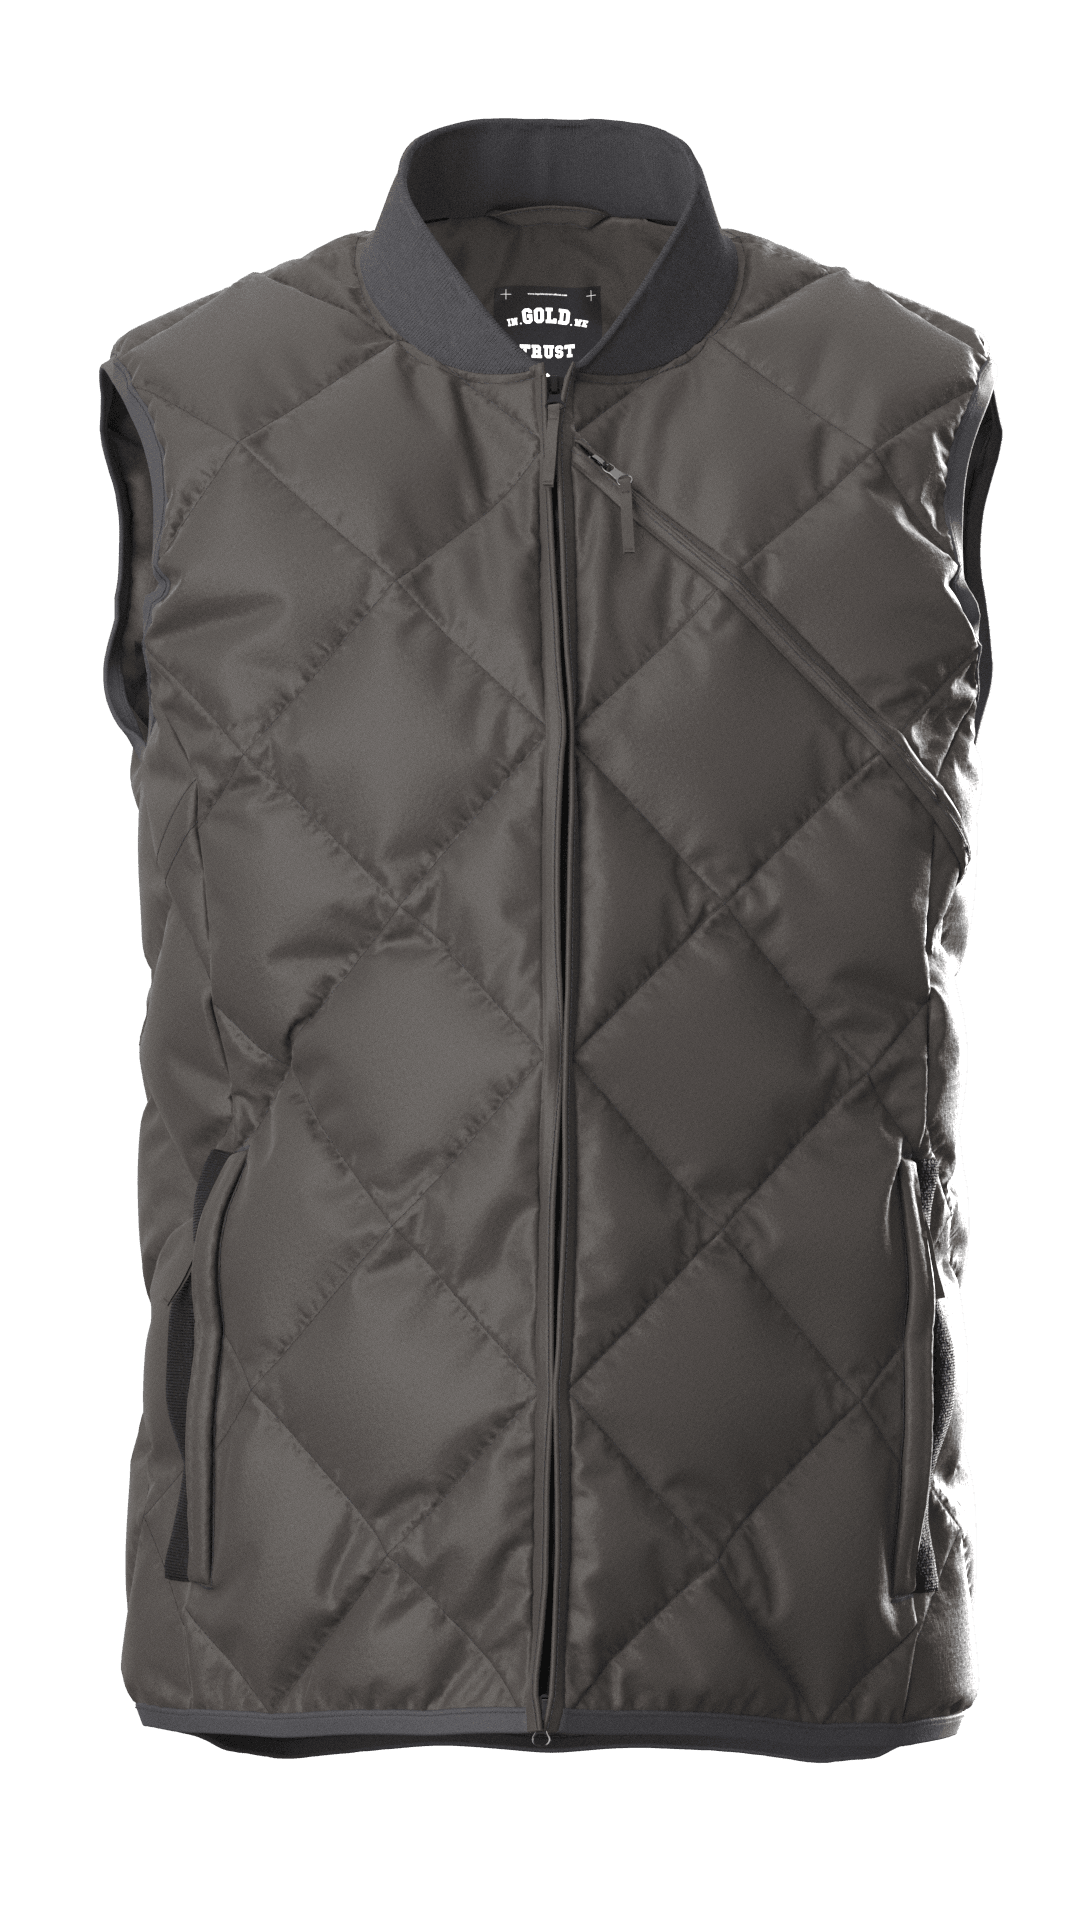 The Woods IGWT x NOMAD® Bodywarmer